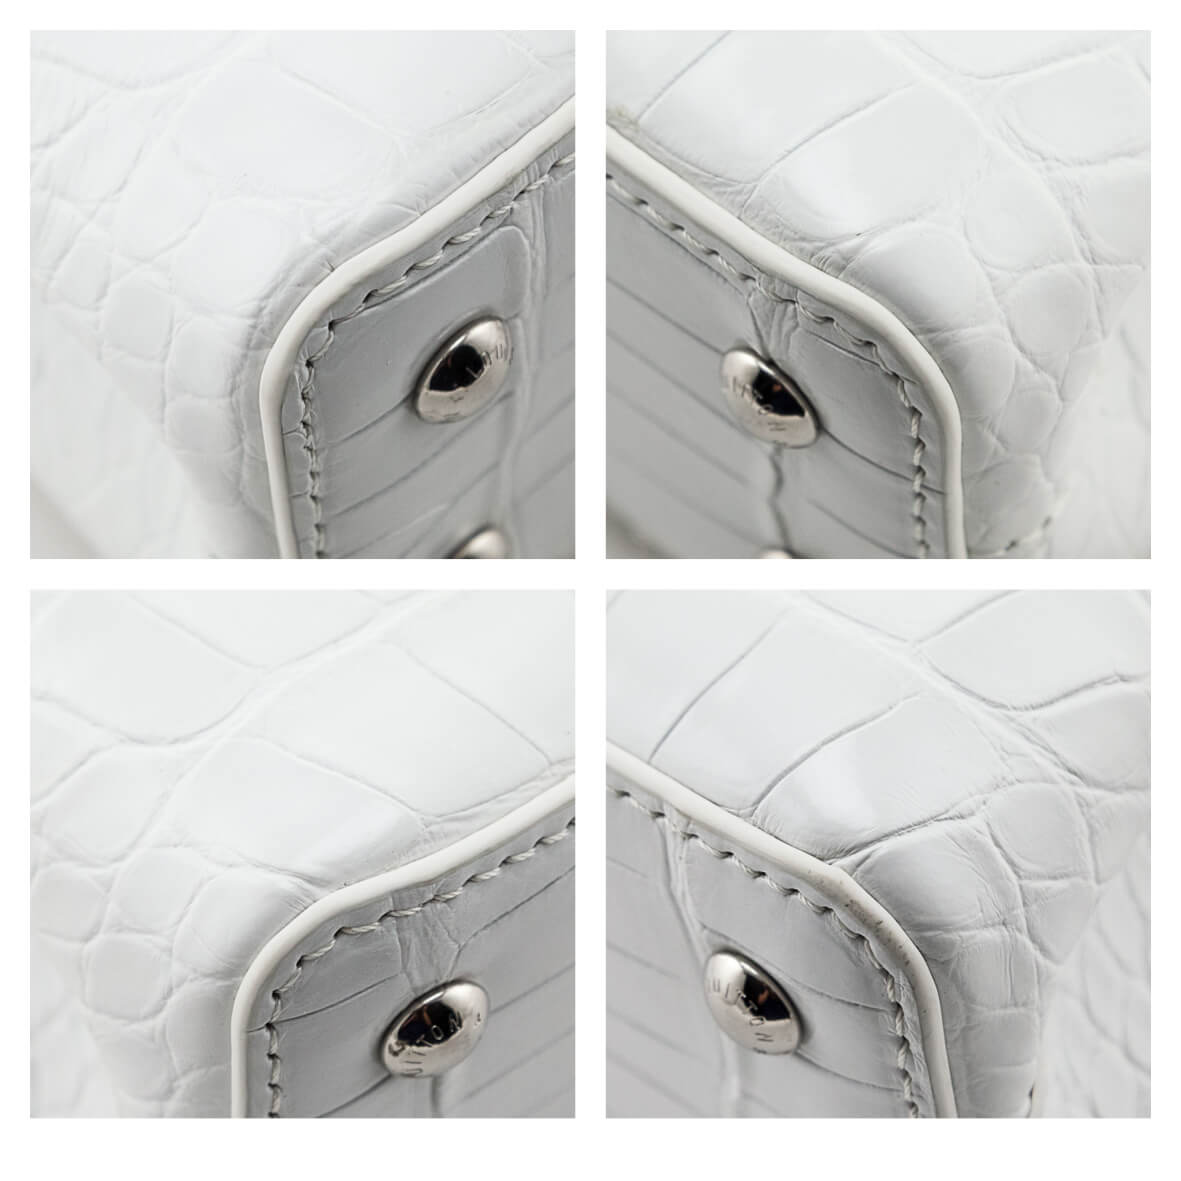 Lv capucines mini frosted white looks great!